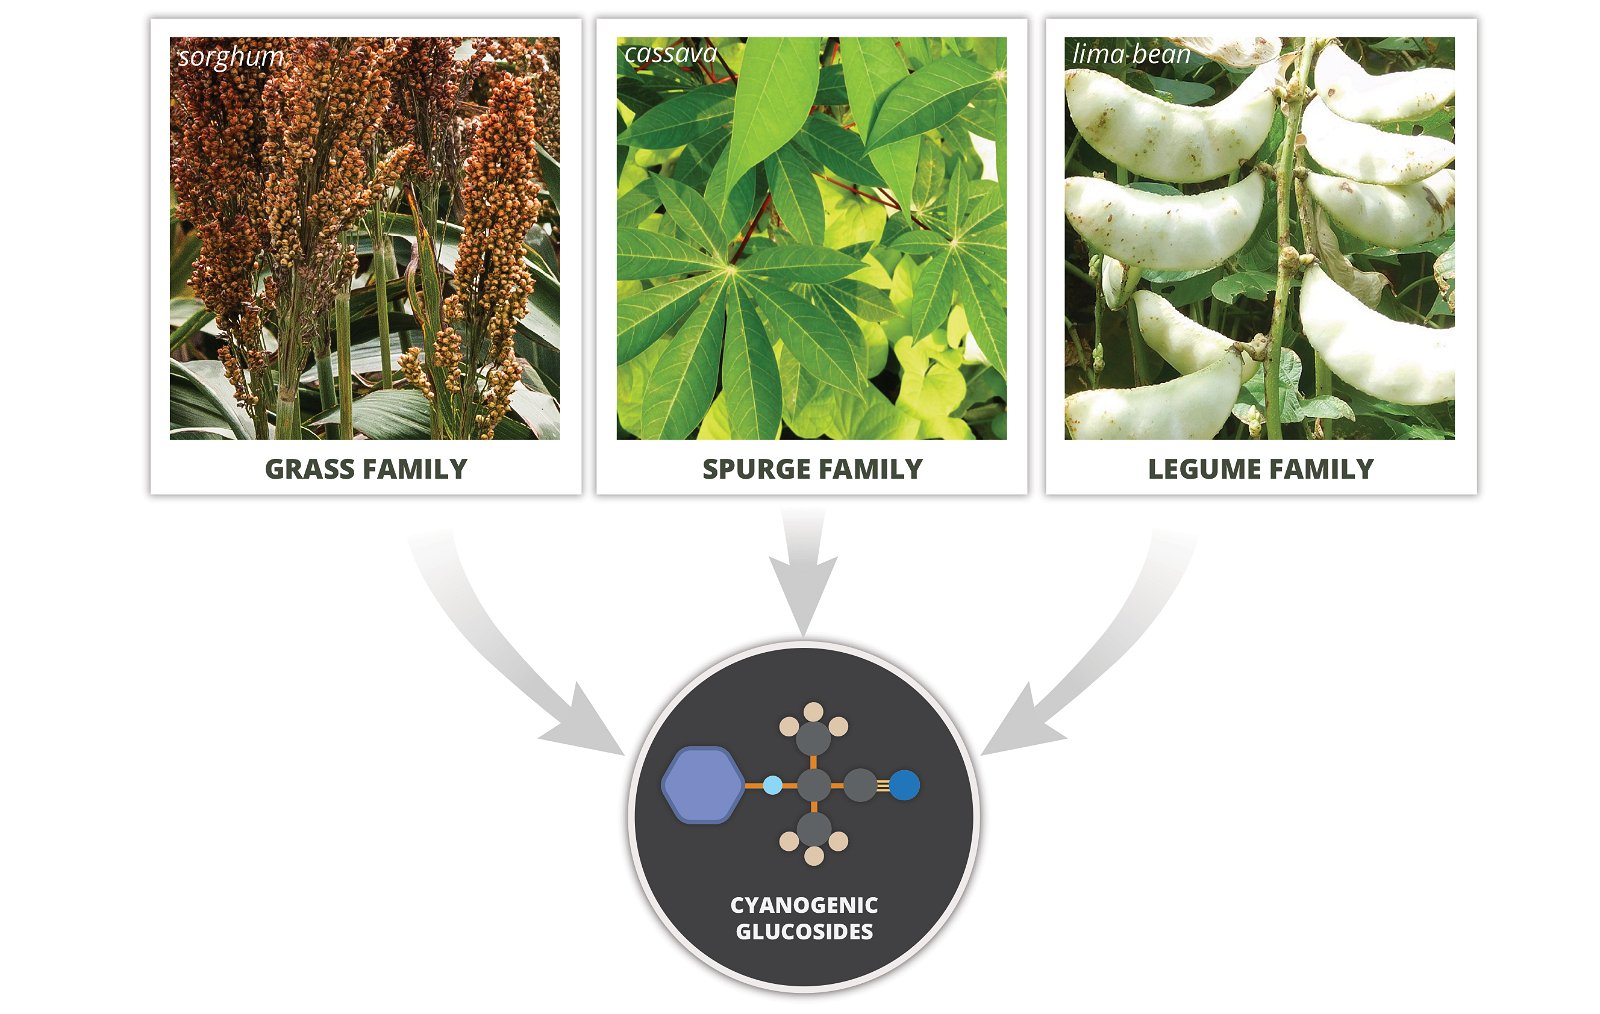 Plants in several families produce cyogenic glucosides